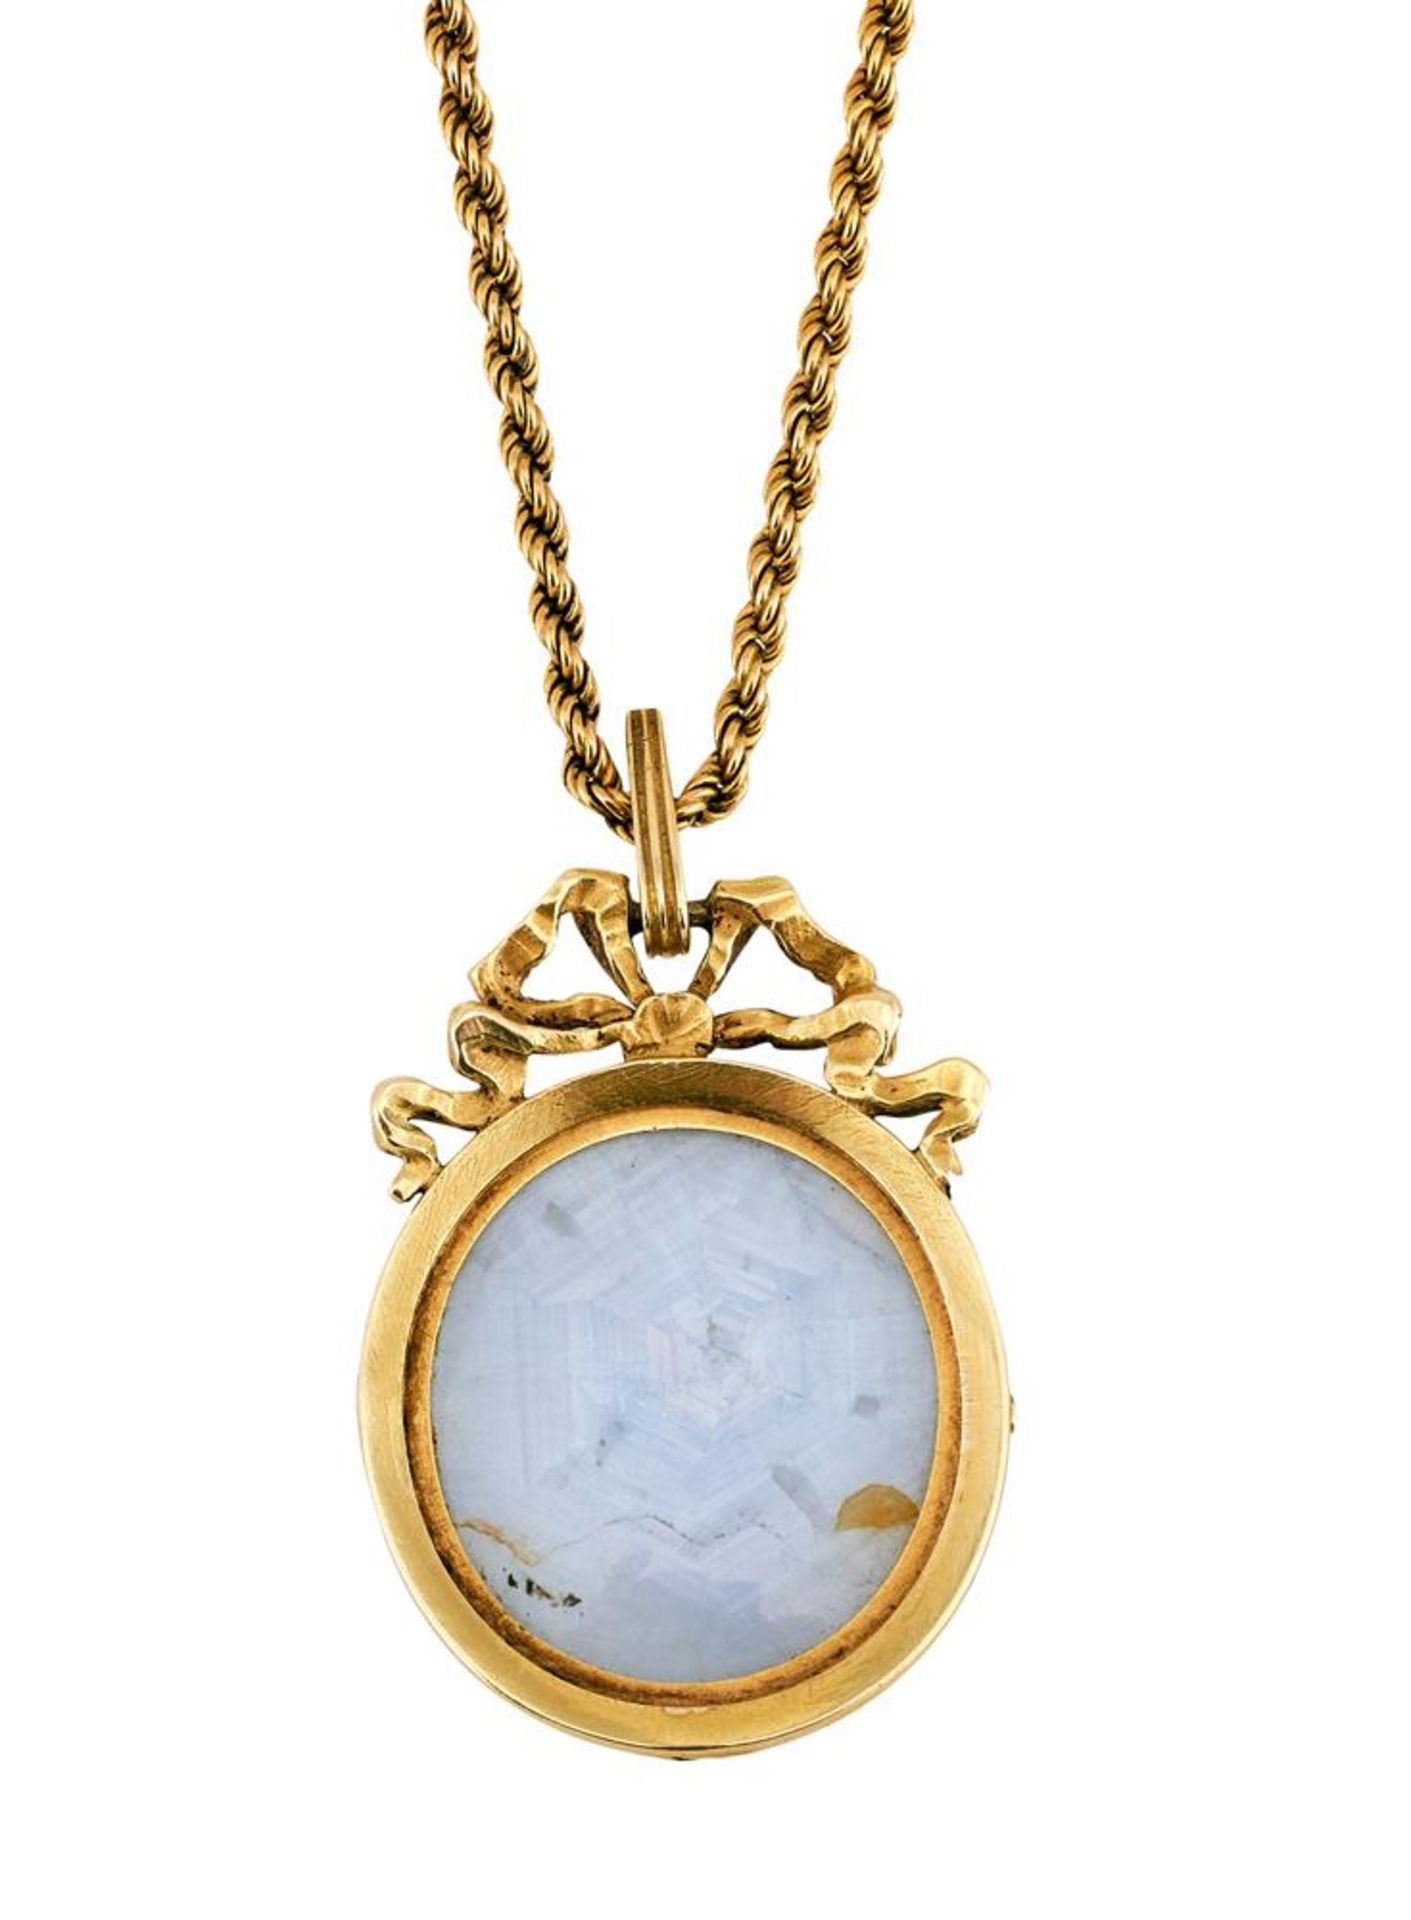 A FRENCH LATE 19TH CENTURY GOLD AND STAR SAPPHIRE PENDANT - Image 2 of 2